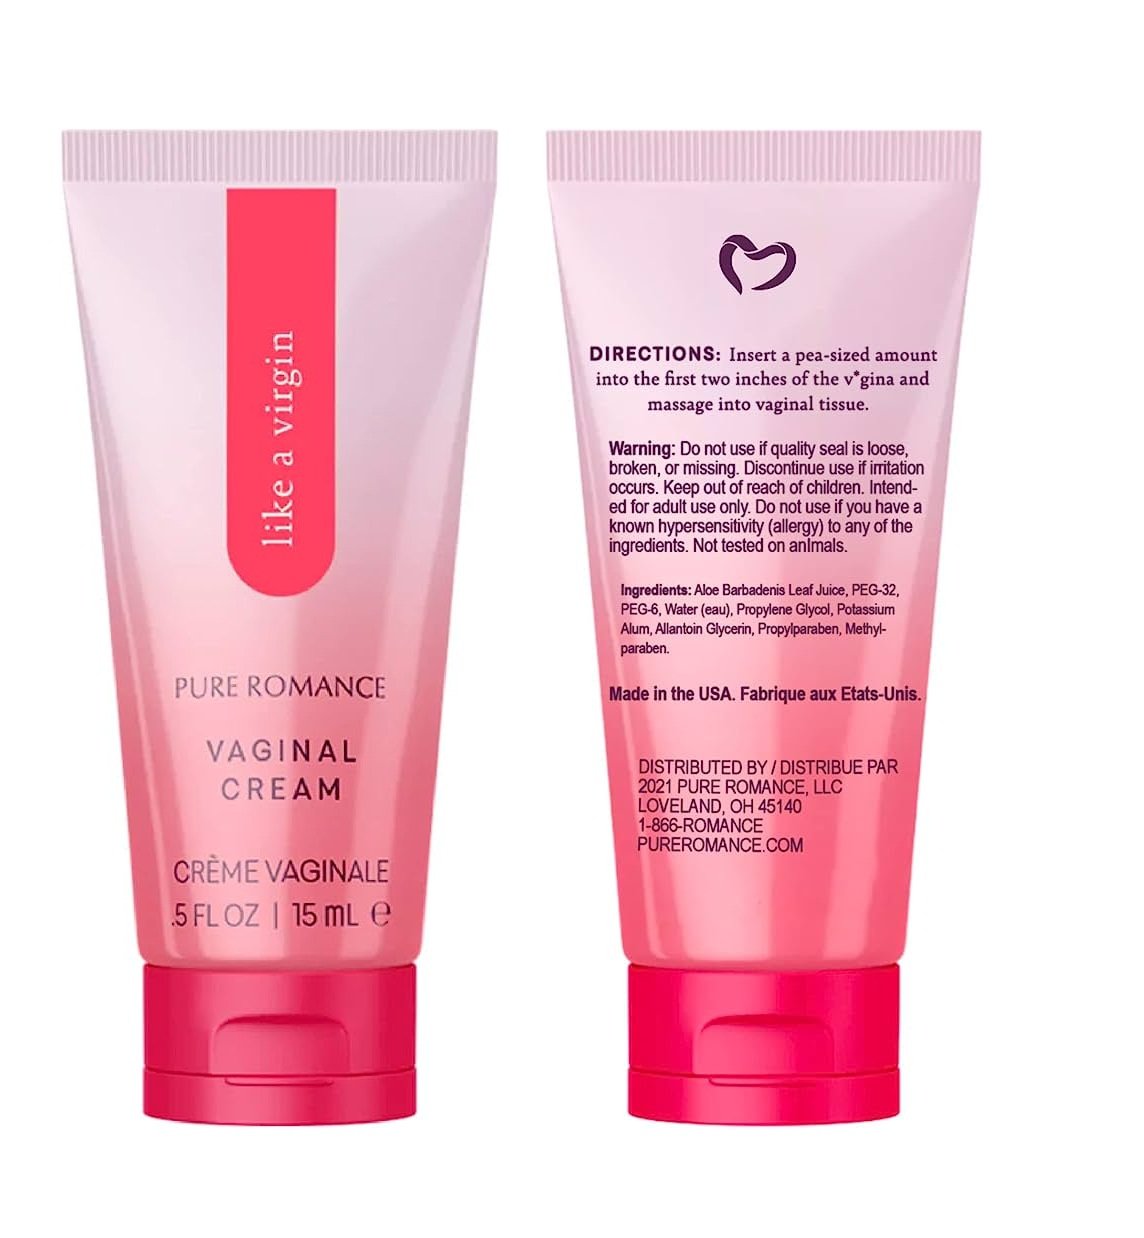 Buy Pure Romance Vaginal Tightening Cream In Pakistan at Rs. 3300 from Likeshop.pk